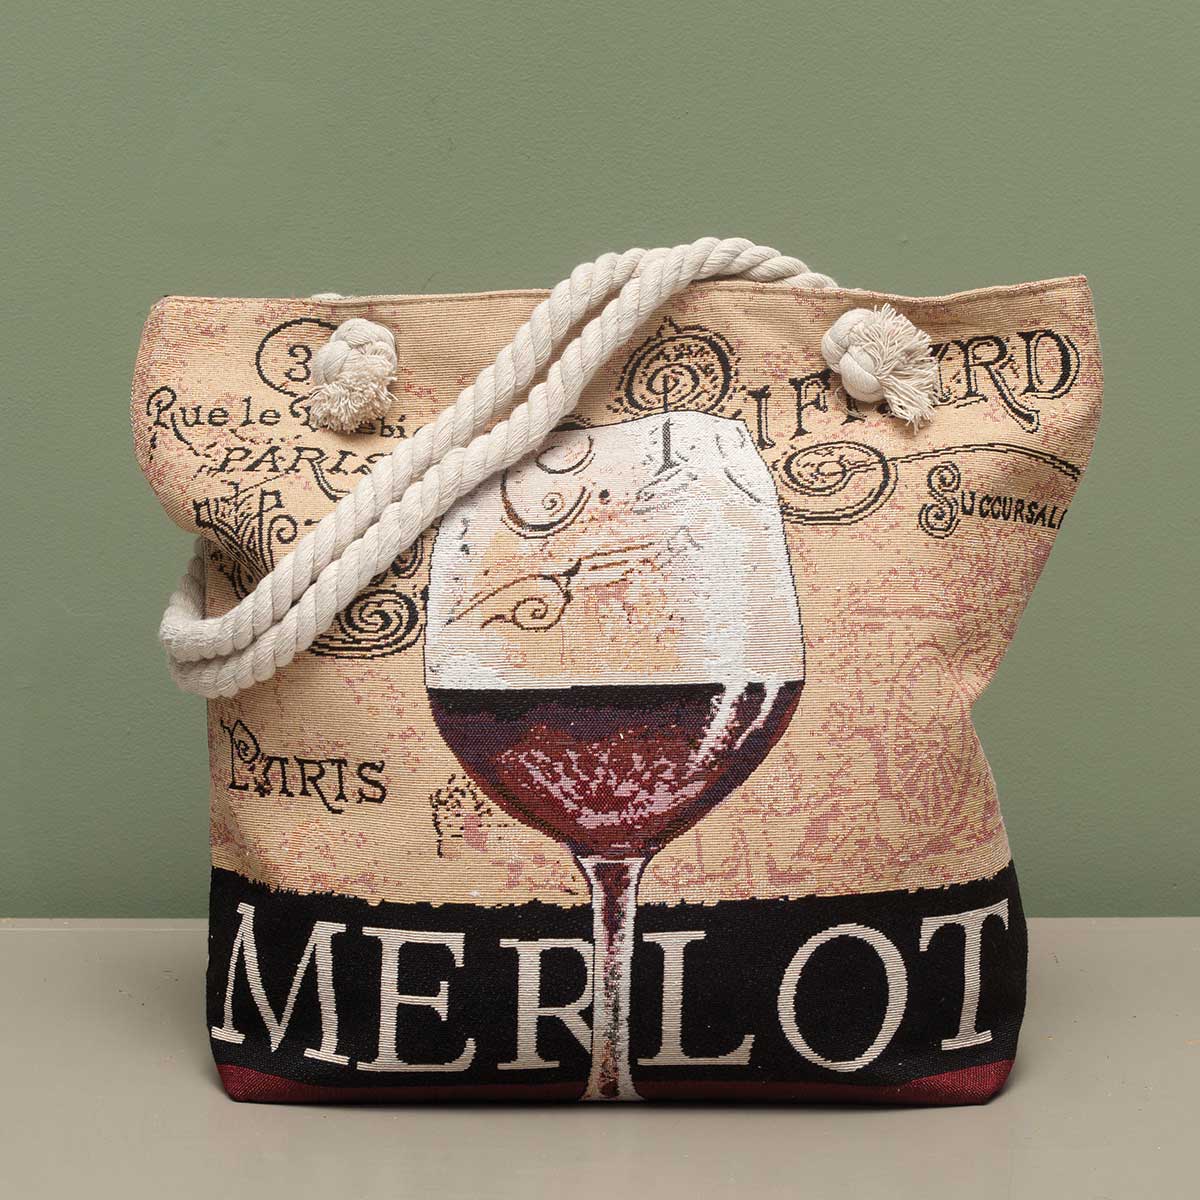 Merlot Tapestry Bag 17.5"x5"x14" with 10" Shoulder Strap, Lining